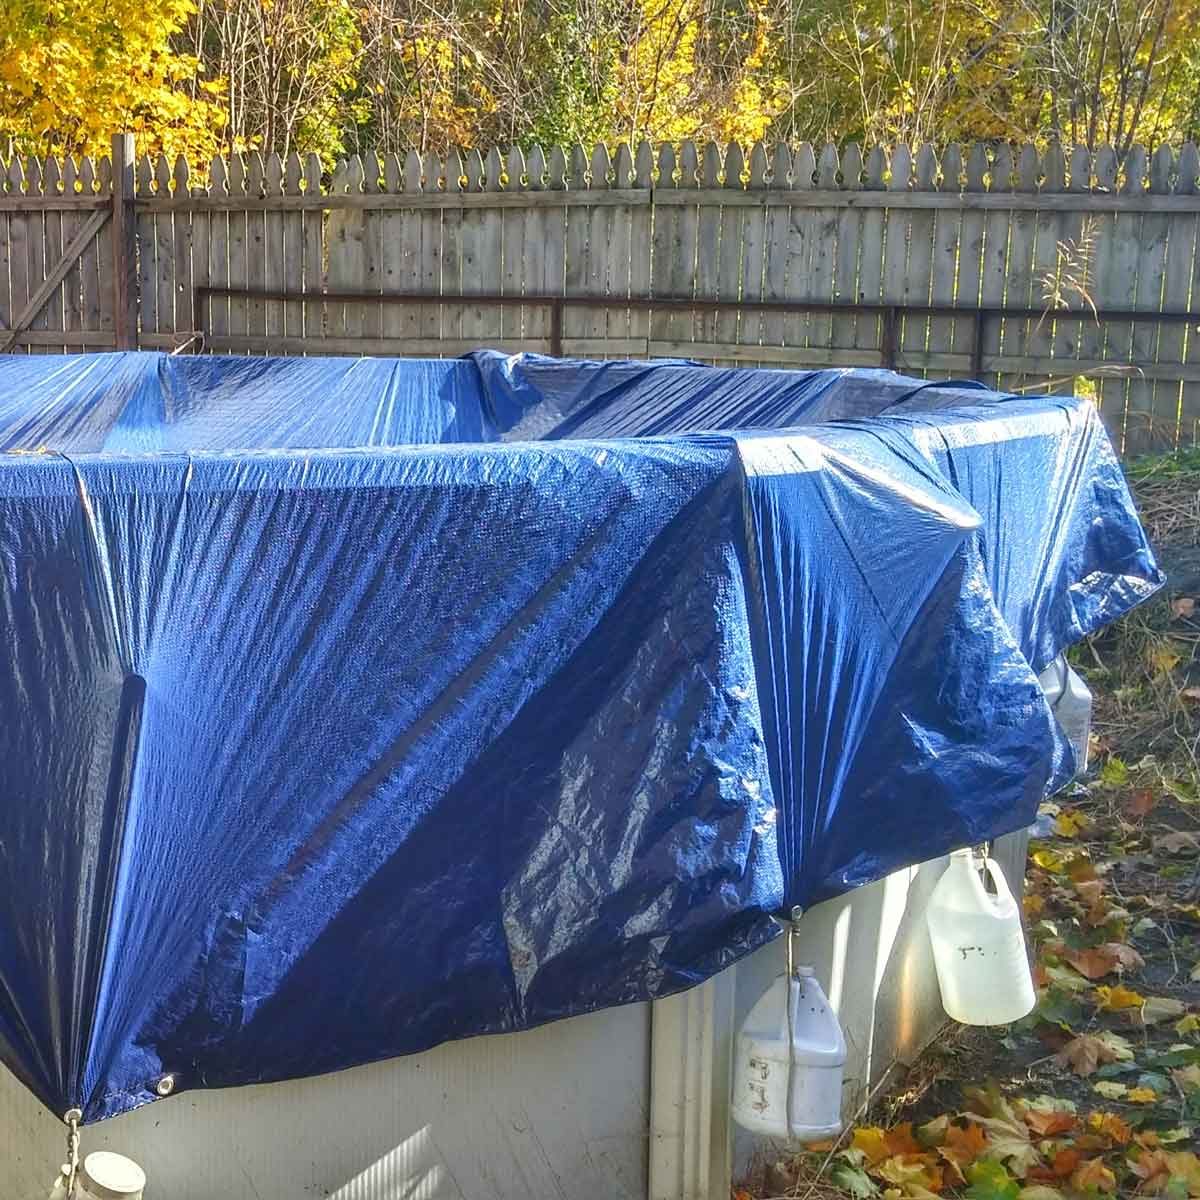 Maintaining An Above Ground Pool, How To Install Winter Cover On Above Ground Pool